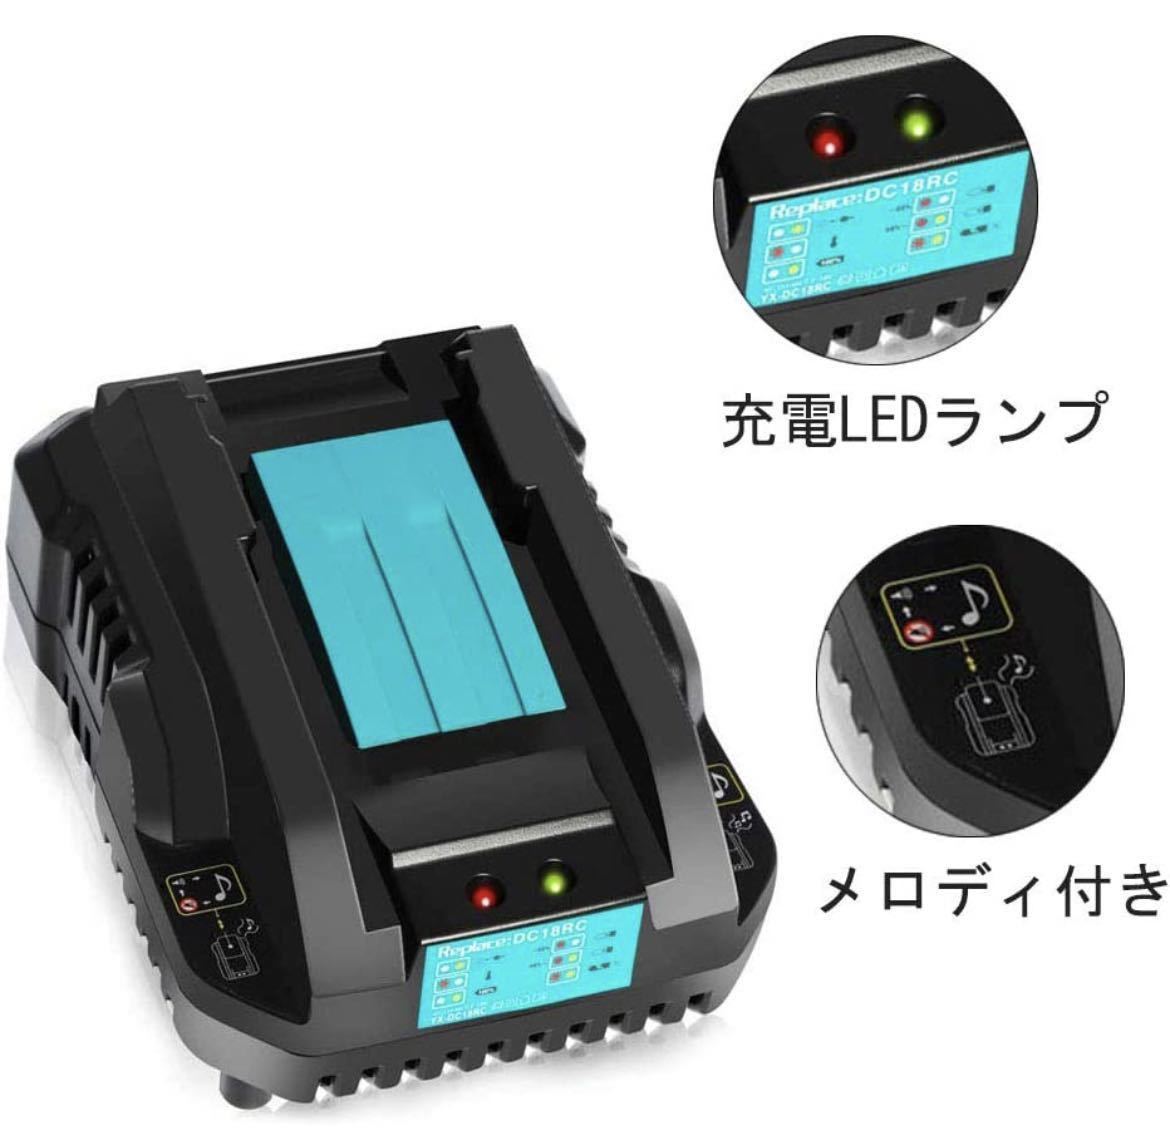  Makita interchangeable charger DC18RC fast charger interchangeable goods makita Makita charger battery DIY ( small size type ) 14.4v 18v correspondence BL1860b